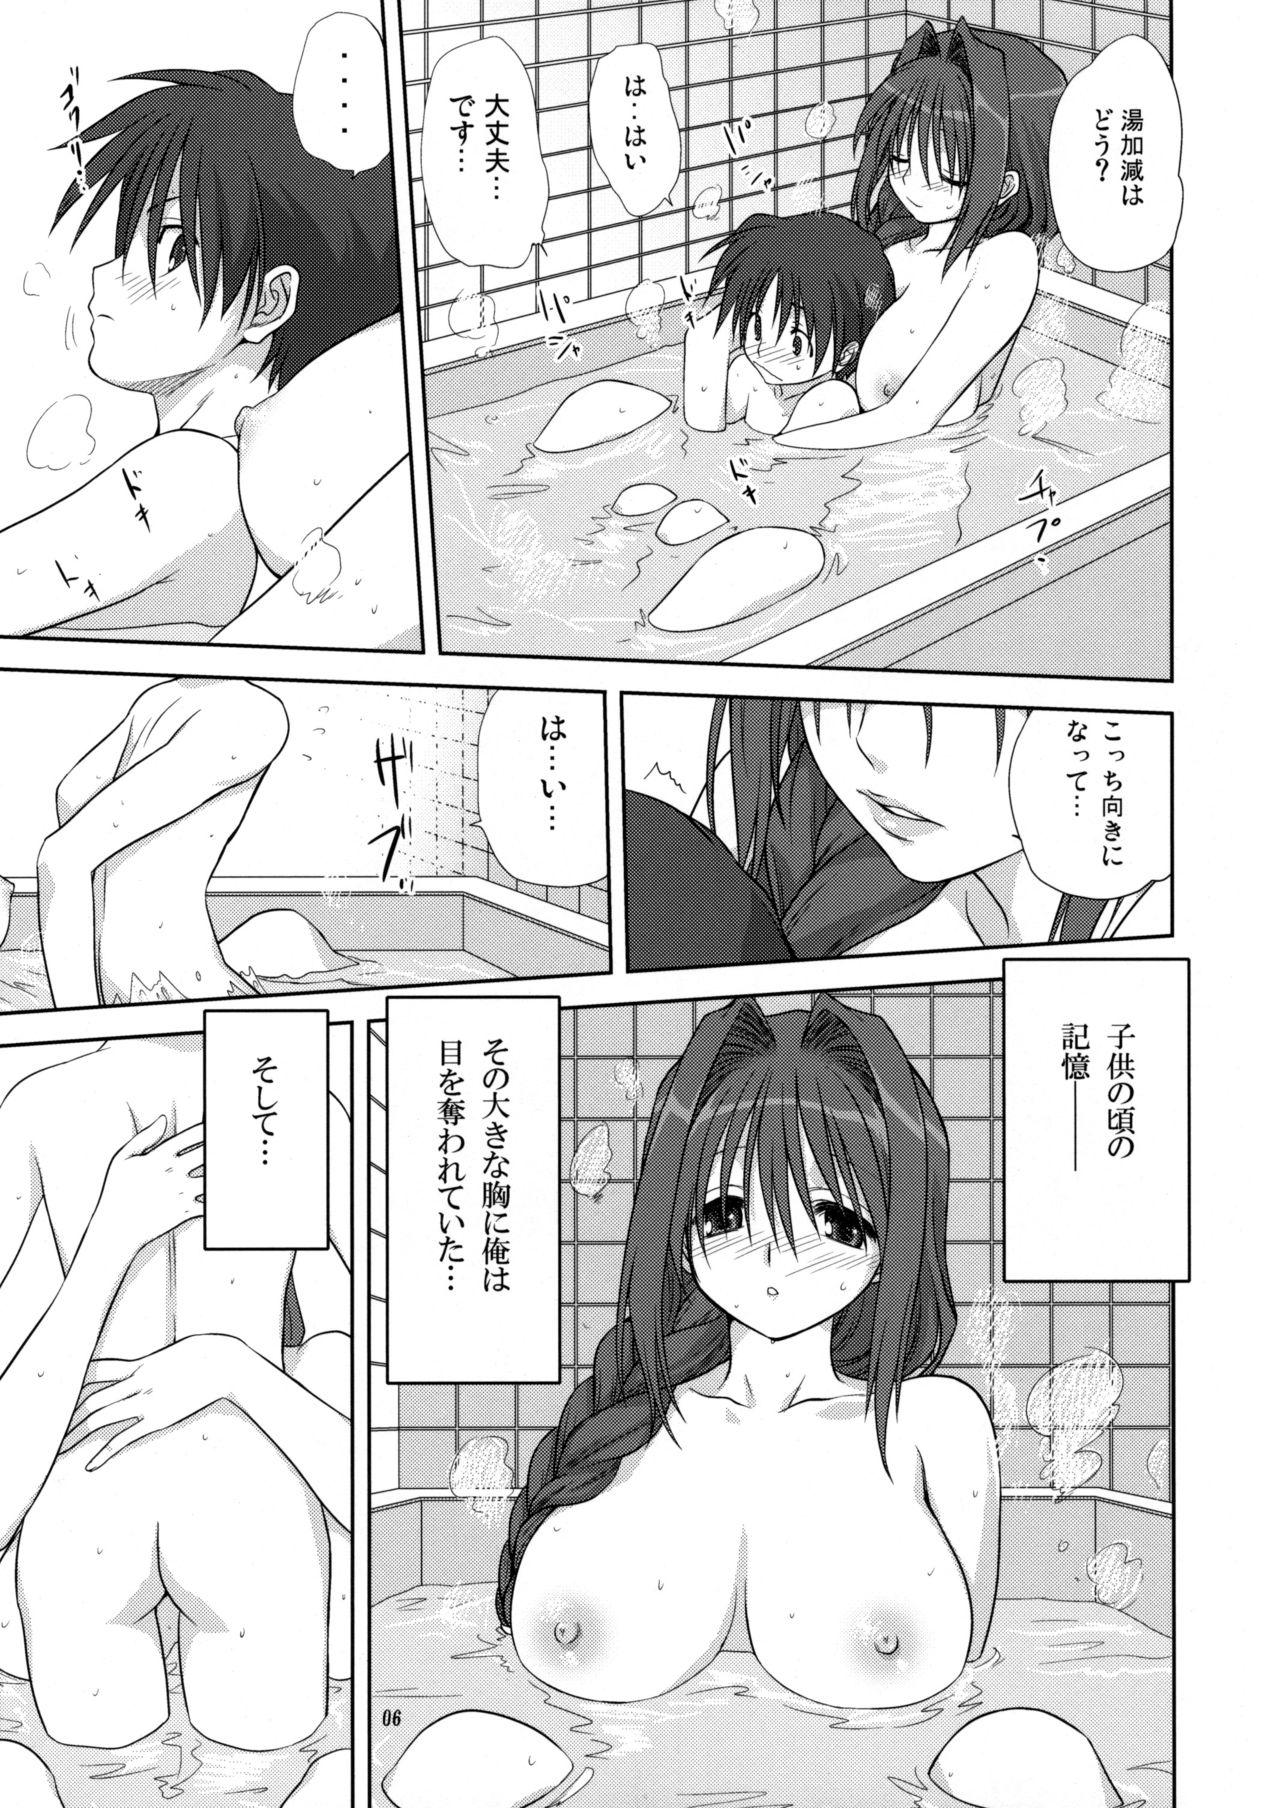 Fat Ass Akiko-san to Issho 4 - Kanon With - Page 5